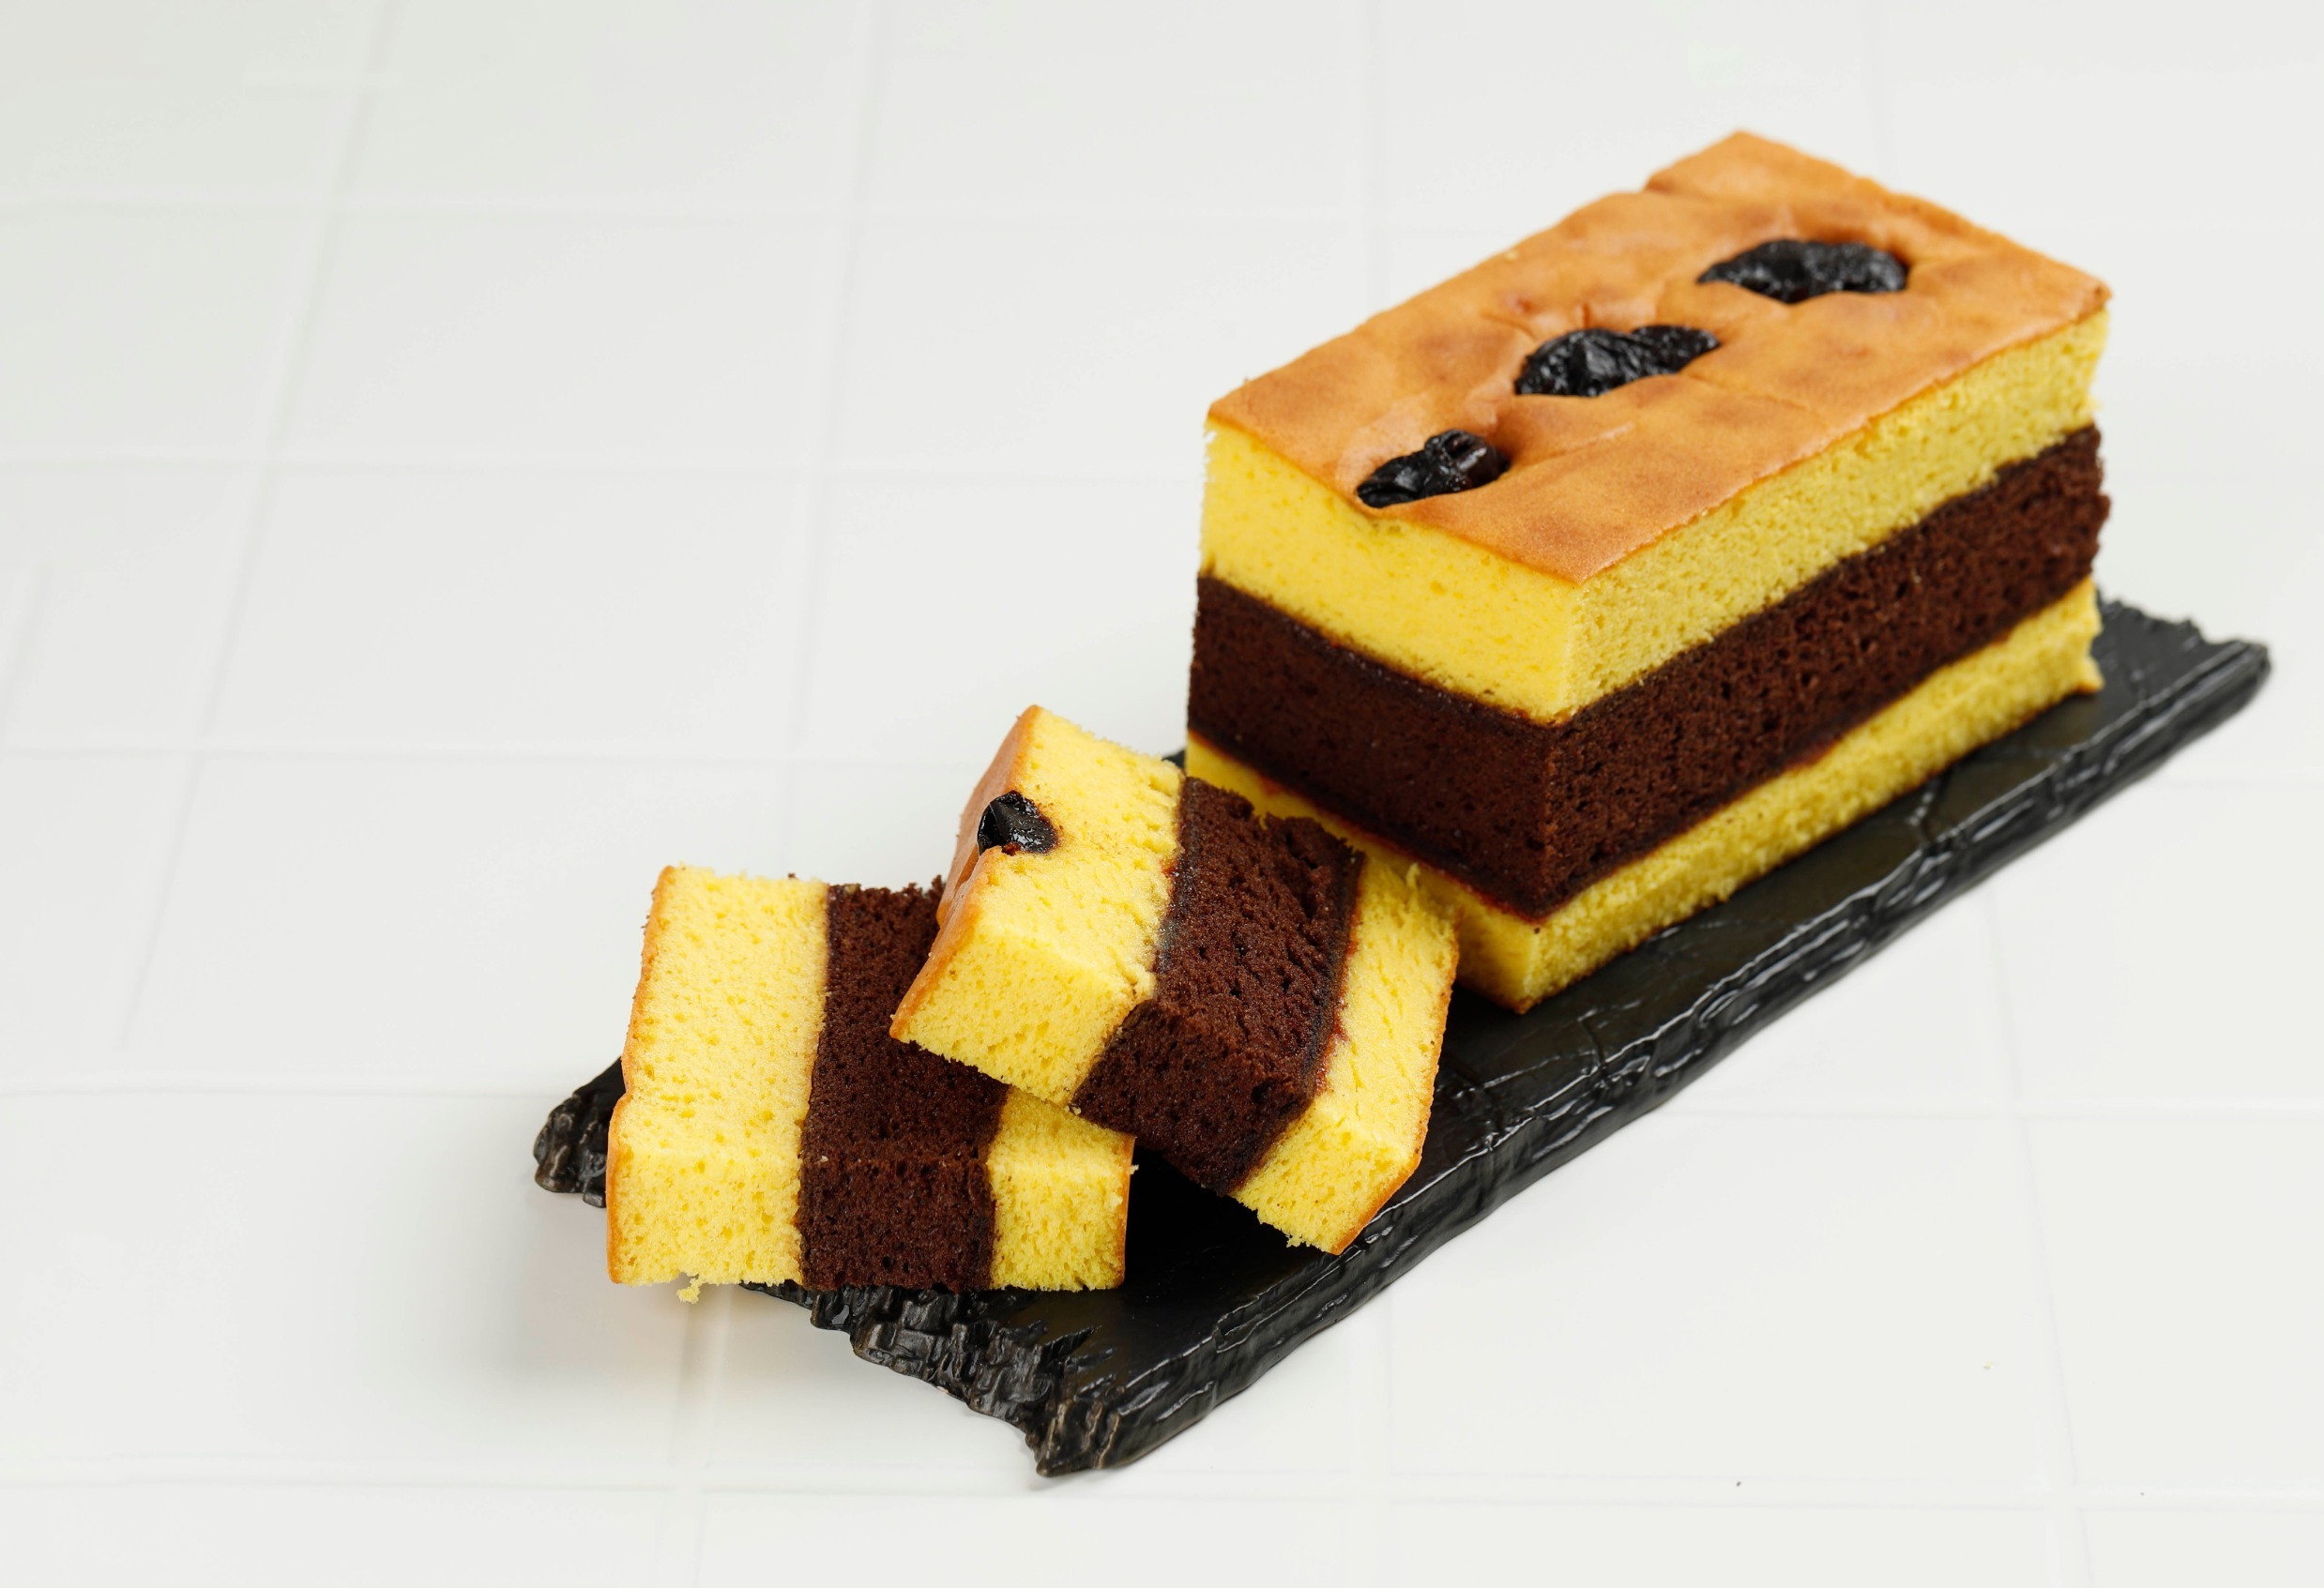 Lapis Surabaya or Spiku, Indonesian Three Layer Cake with Strawberry Jam Between the Layer. Topped with Prunes.